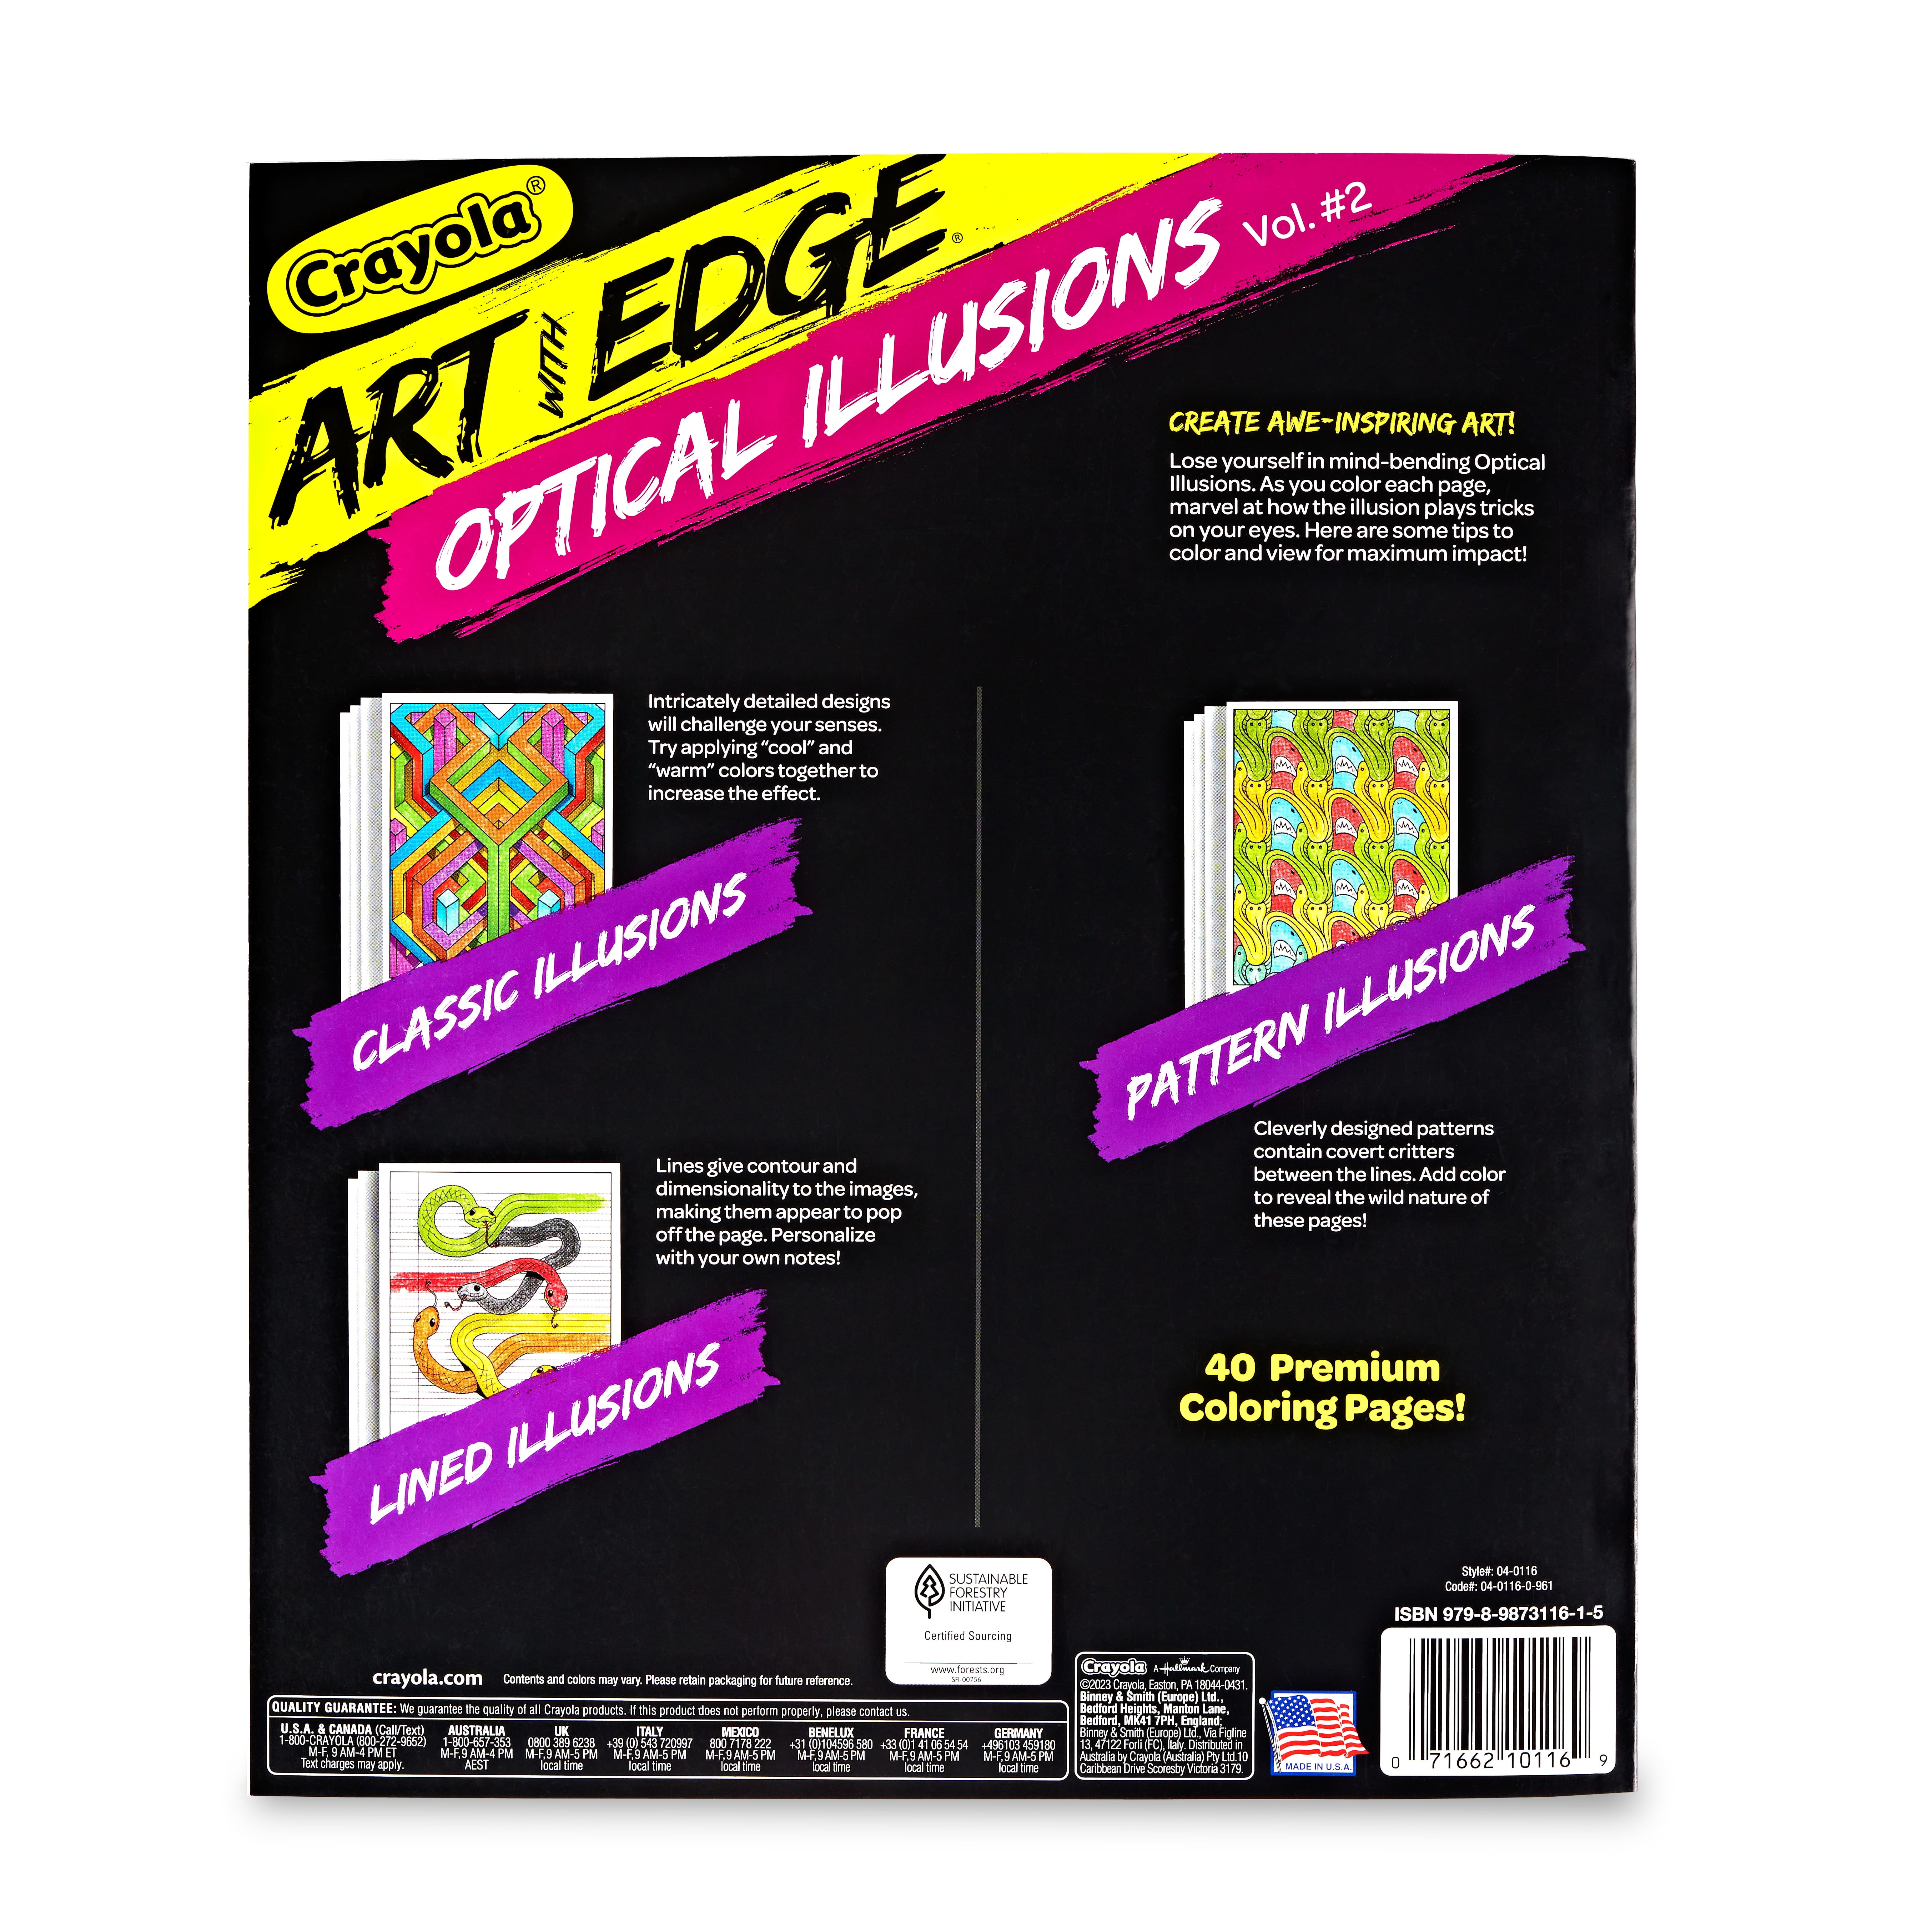  Crayola Art With Edge Optical Illusions Coloring Pages (40pgs),  Adult Coloring, 3D Art, Gift for Teens & Adults